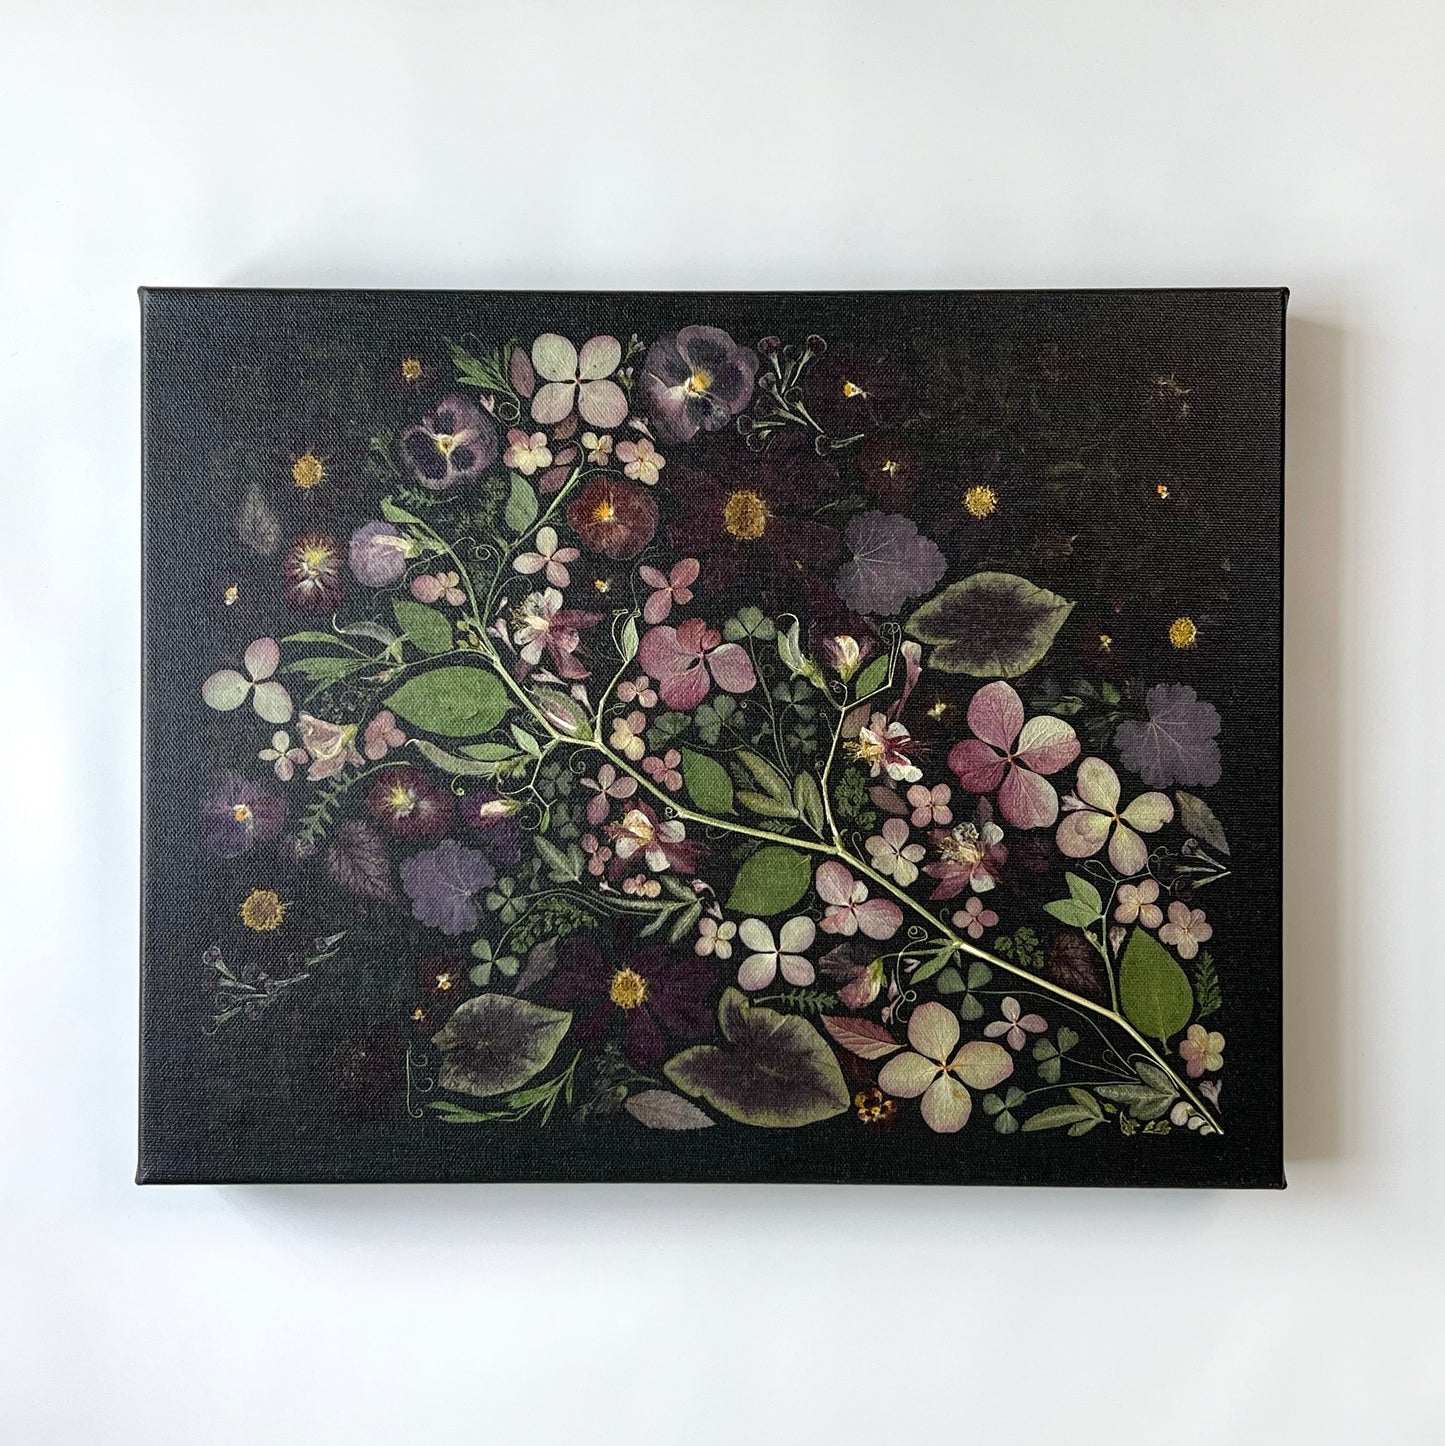 A black satin finish canvas on a white background. The canvas is a display of pressed flowers all arranged artfully appearing to come from a long stem with leaves.